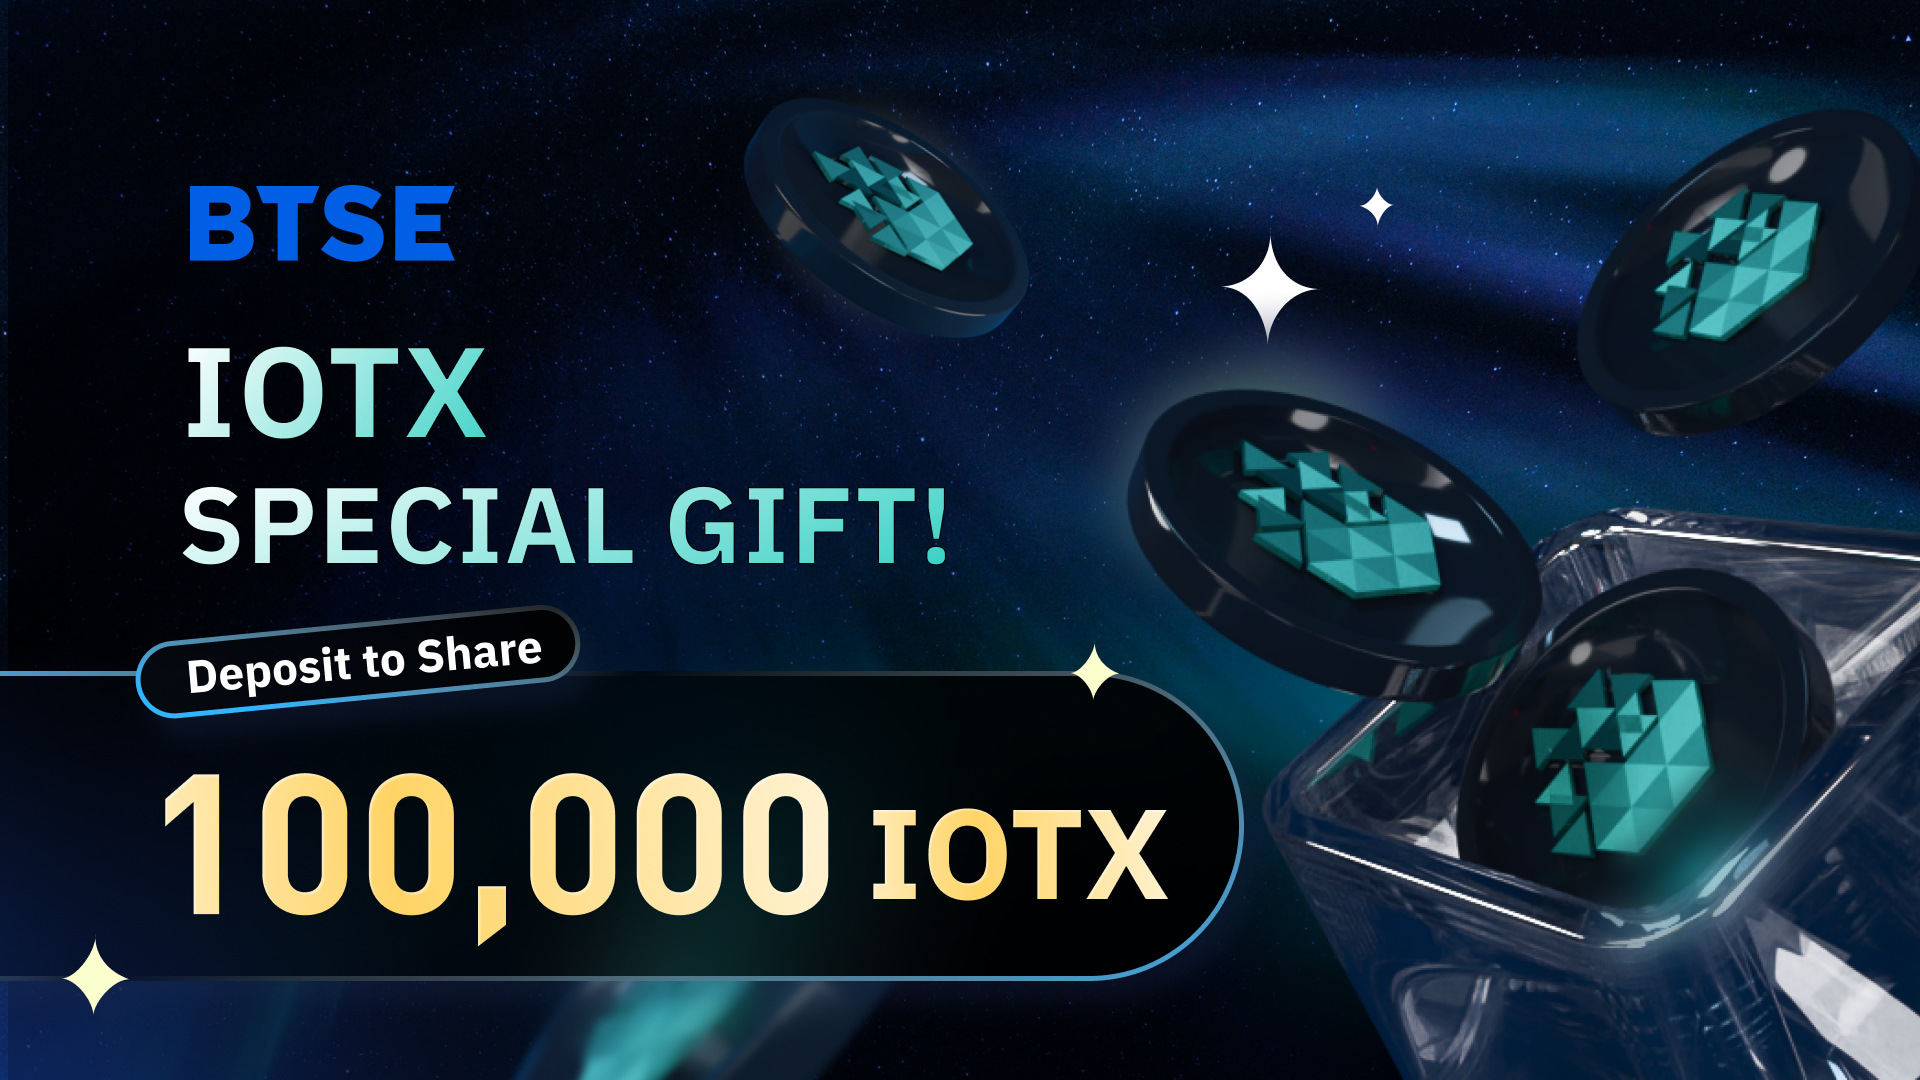 IOTX Special Gift! Deposit to Share 100,000 IOTX Tokens!